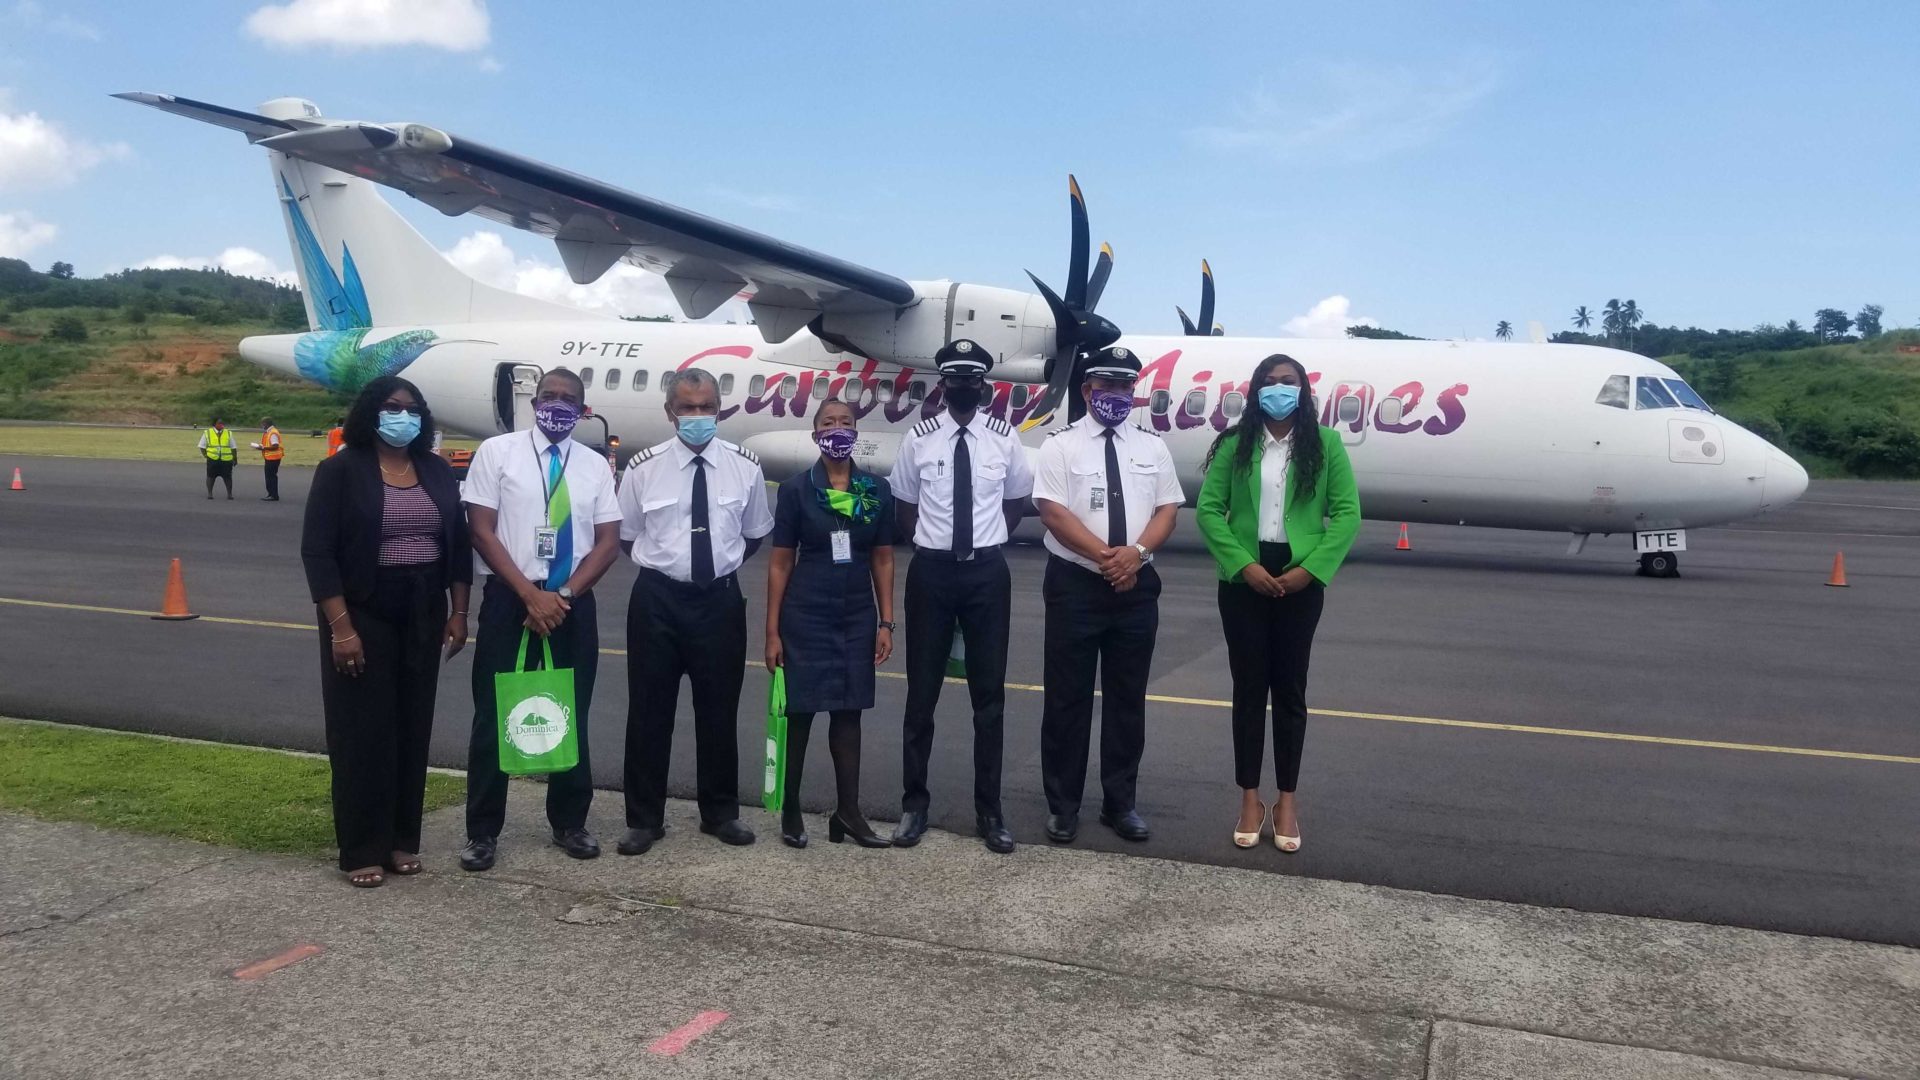 CARIBBEAN AIRLINES’ LAUNCHES SERVICE BETWEEN BARBADOS AND DOMINICA